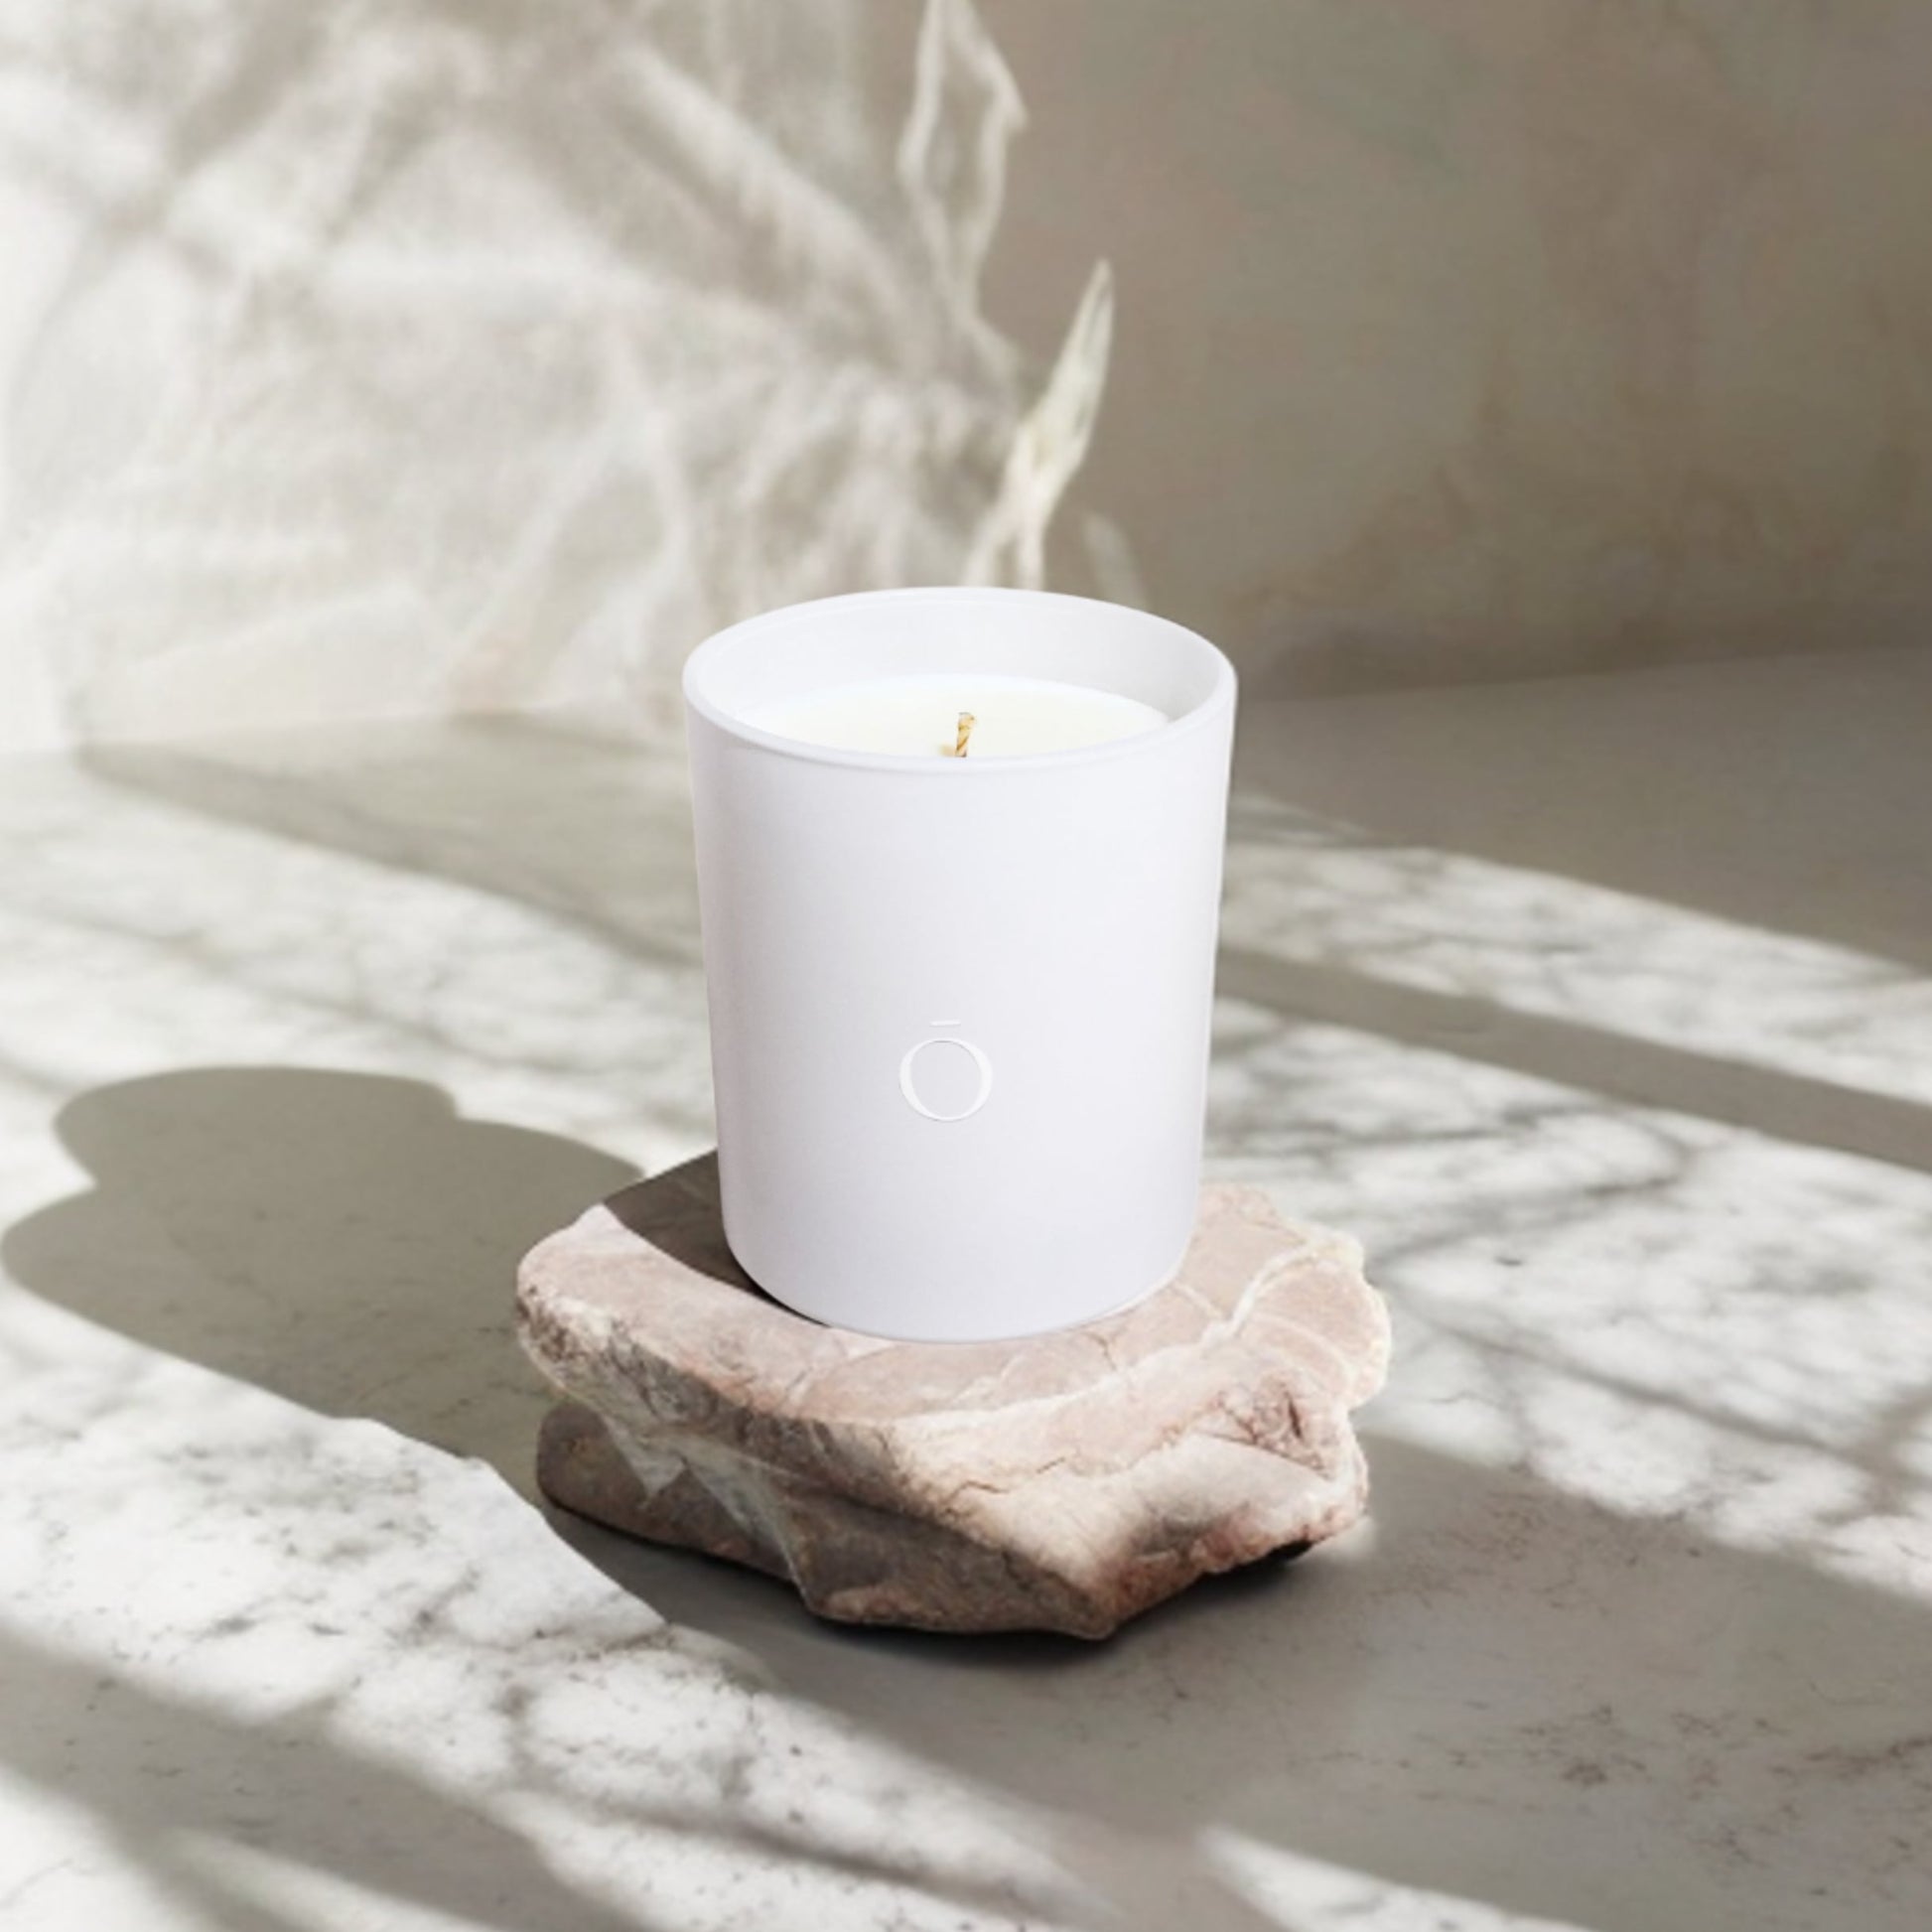 Shō-moon Energise Meditation Candle on top of a rock and Marple surface with soft shadows 